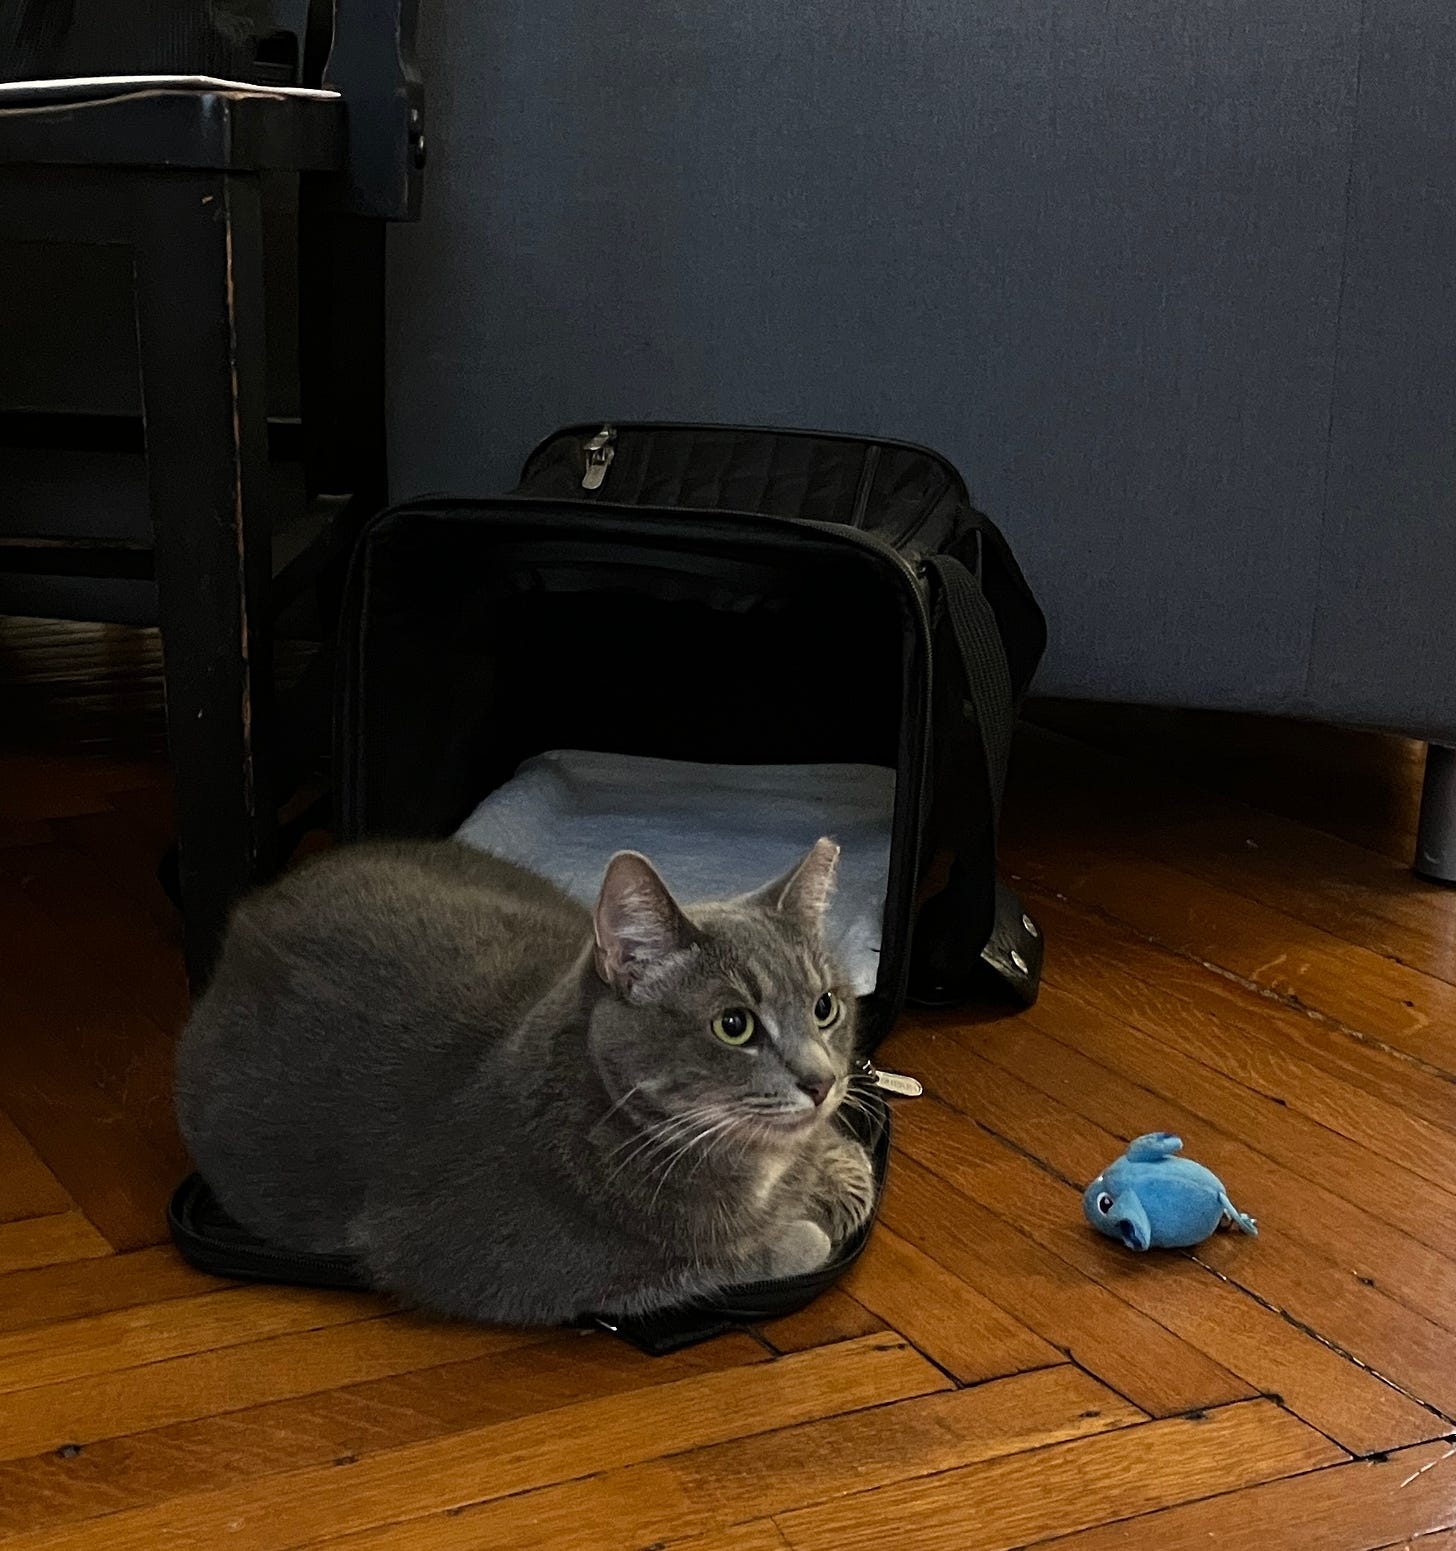 Friday, a grey tabby, sits just outside of her black carrier next to a blue mouse toy. 